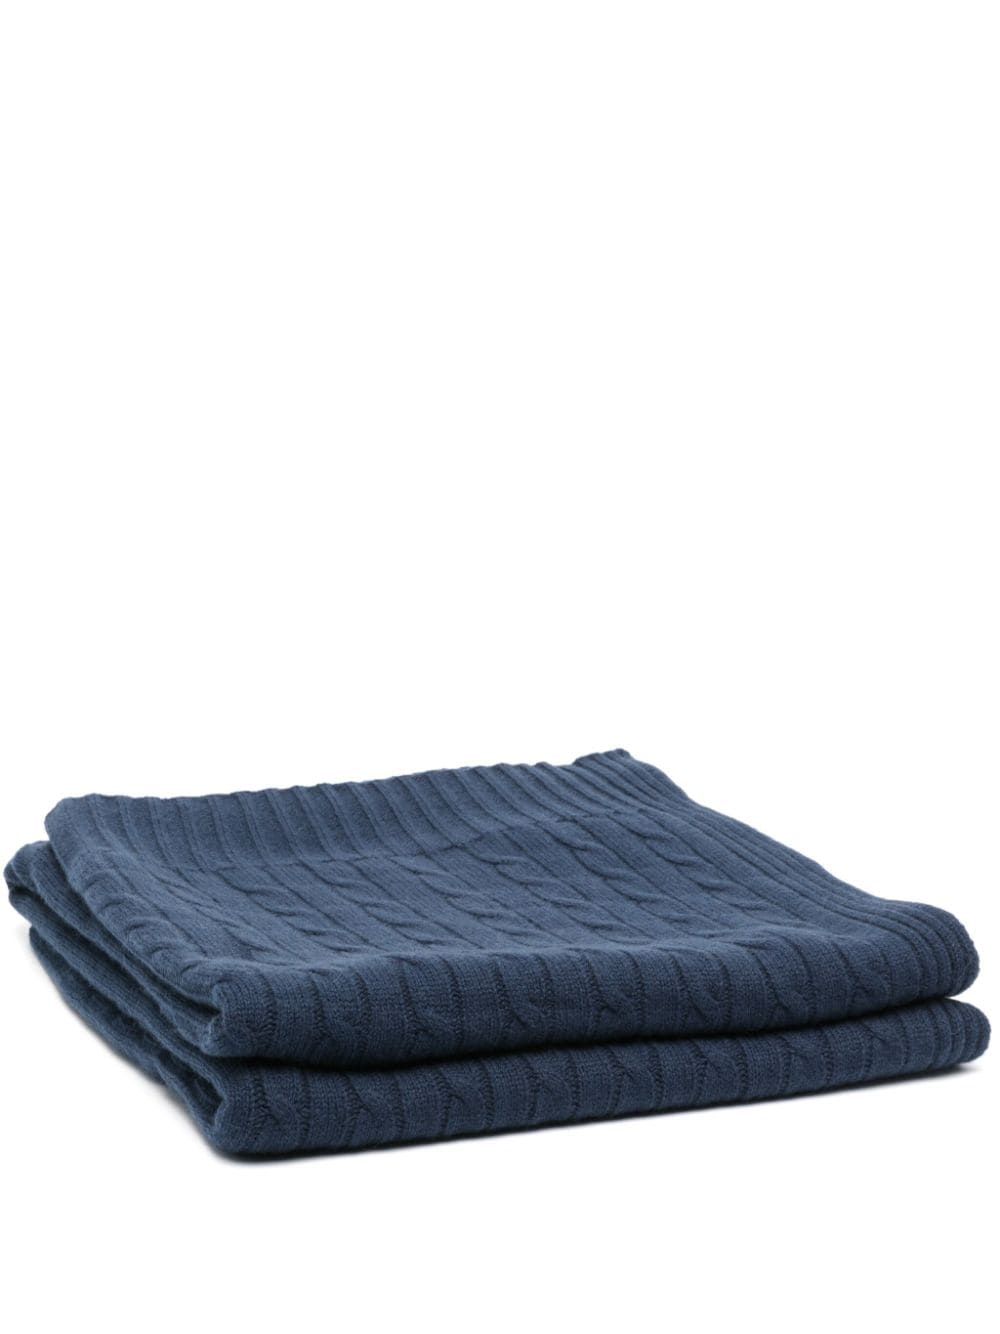 Ralph Lauren Cable-knit Cashmere Blanket In Blue